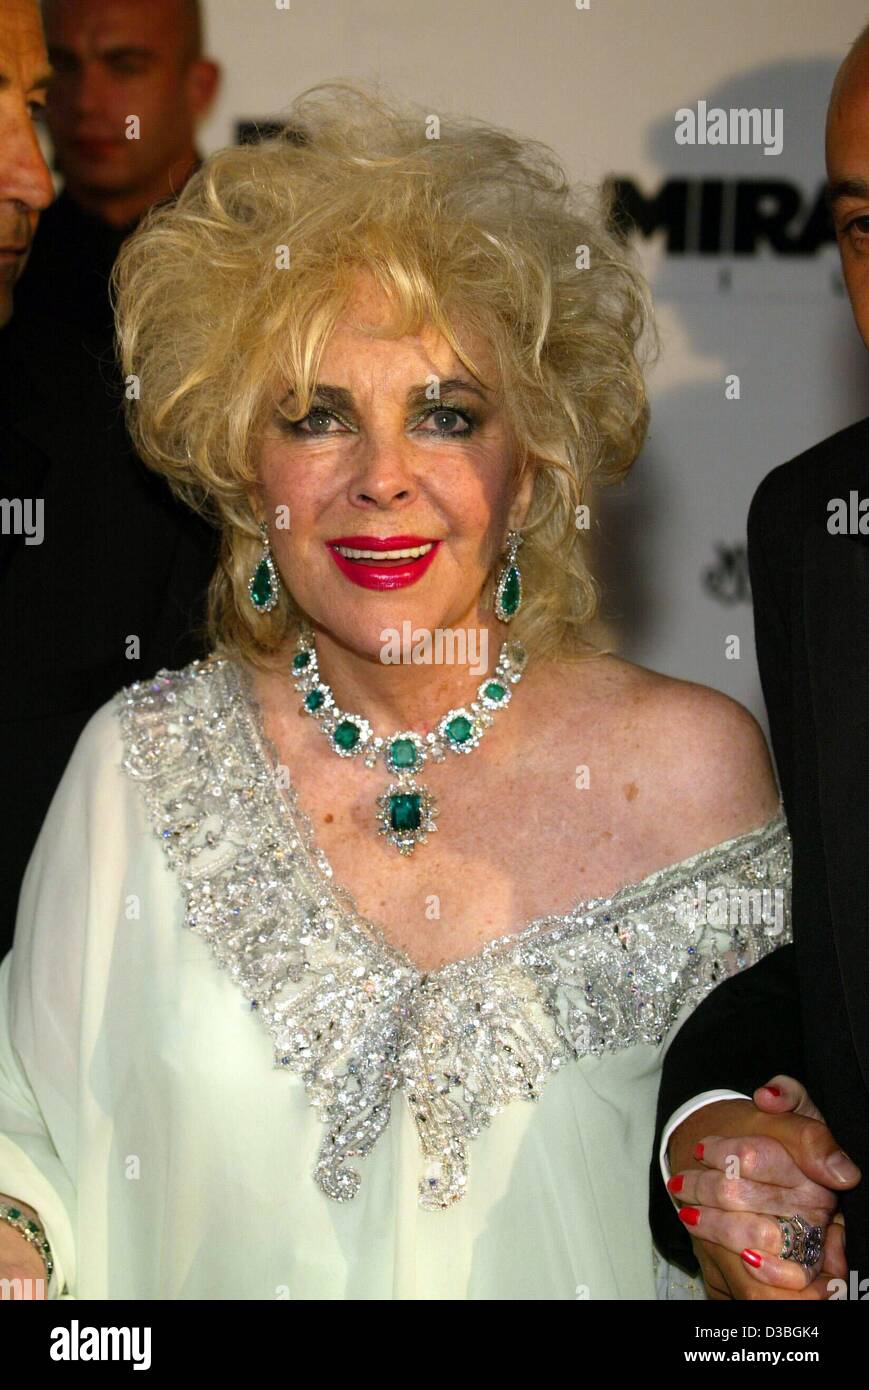 (dpa) - Hollywood diva Elizabeth Taylor smiles as she arrives at the AMFAR (American Foundation for Aids Research) charity gala at the Restaurant Moulin de Mougins near Cannes, France, 22 May 2003. The 71-year-old actress hosted the event which took in 1.3 million dollars in donations. Stock Photo